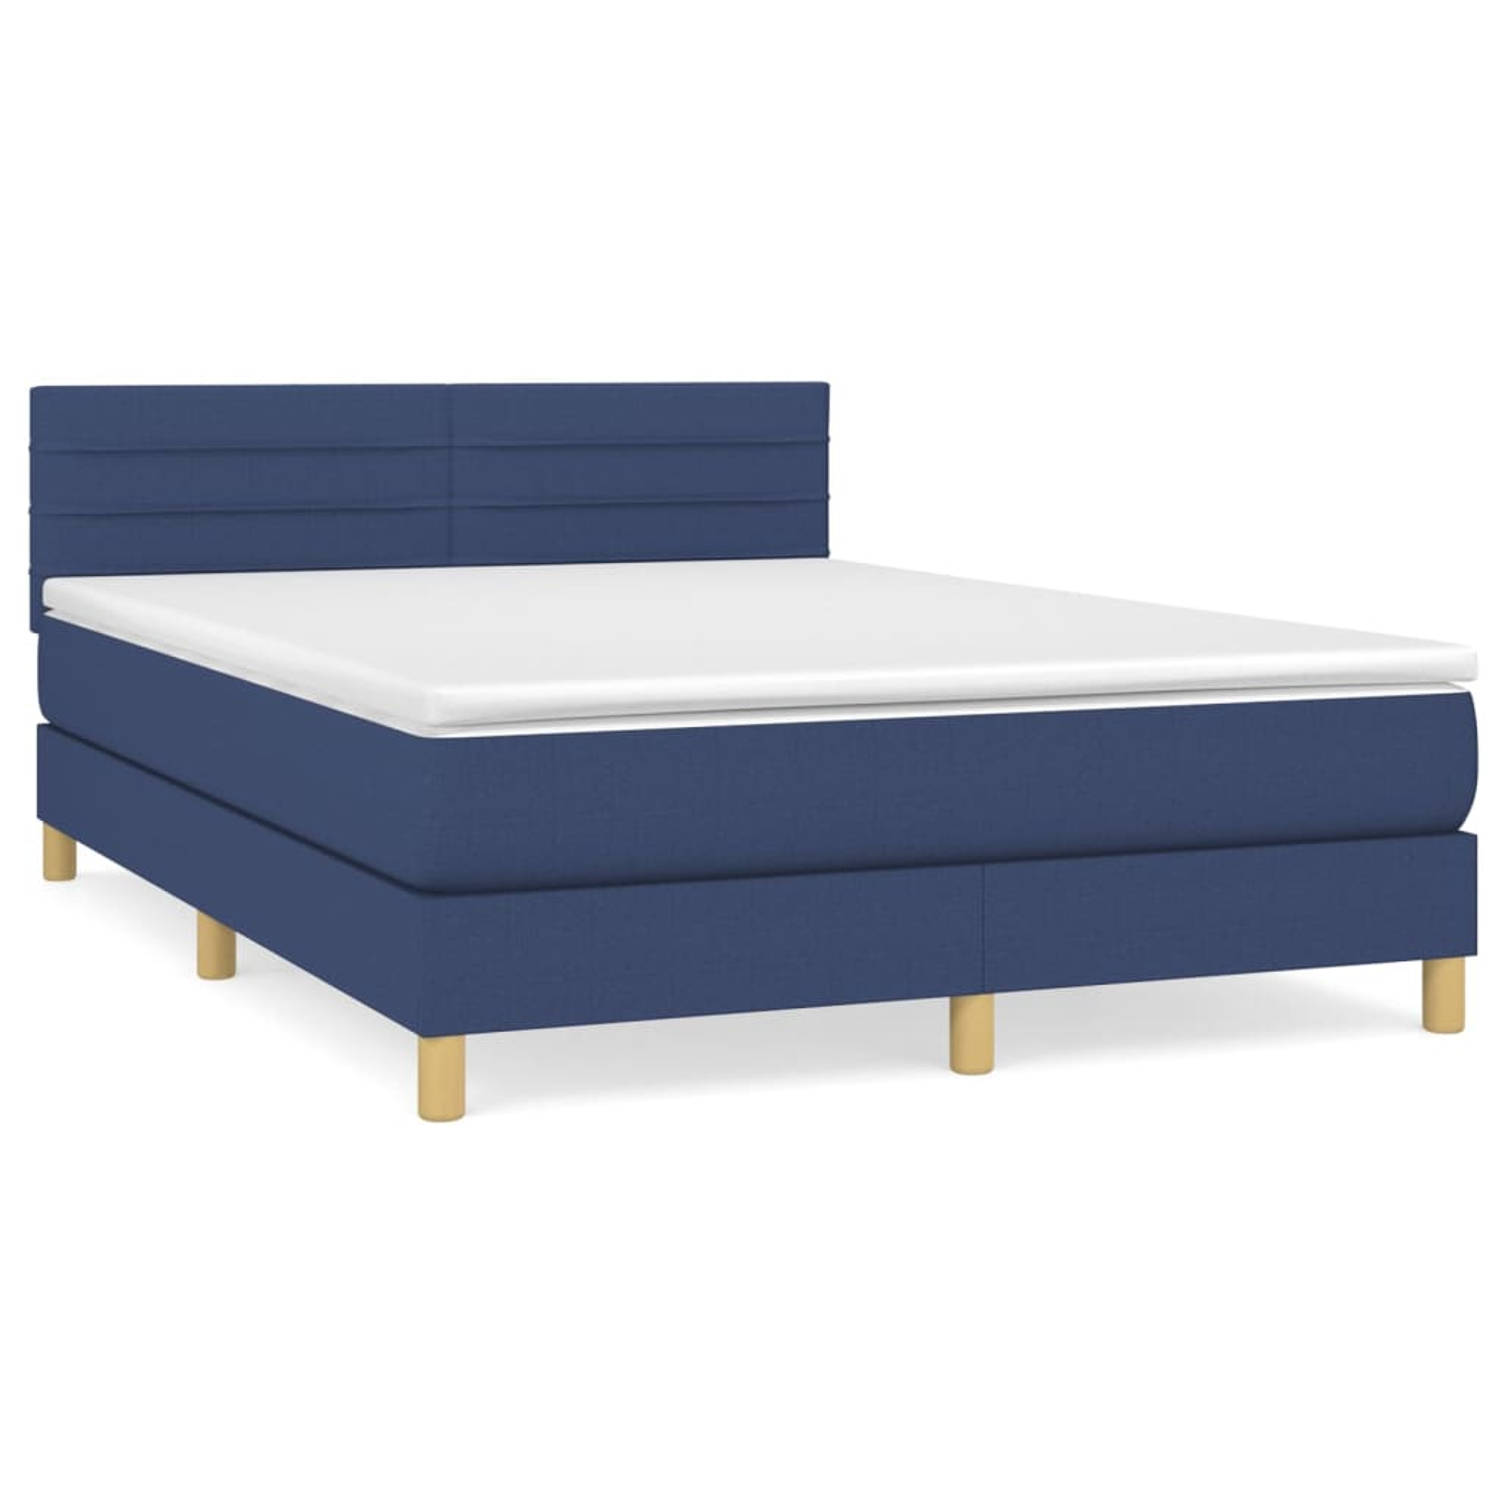 The Living Store Boxspringbed - Comfort - Bed - 193 x 144 x 78/88 cm - Blauw